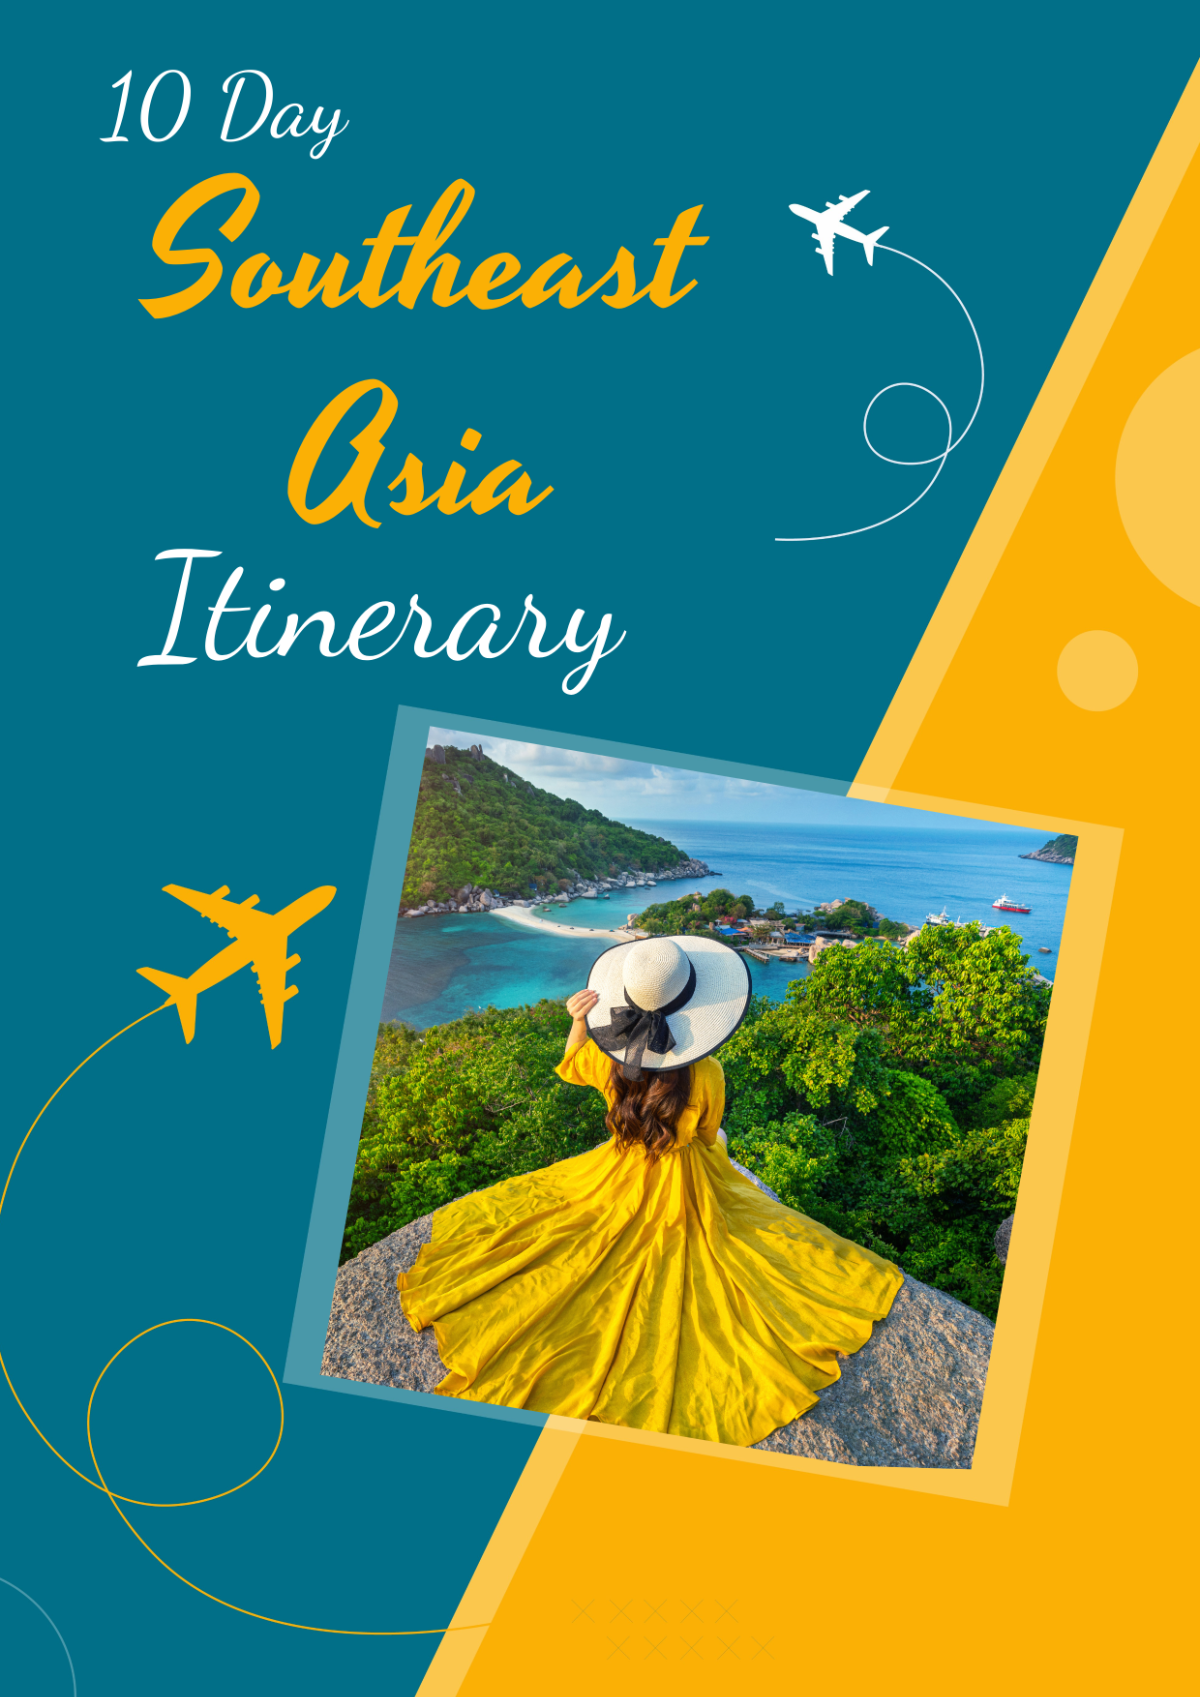 10 Day Southeast Asia Itinerary Template